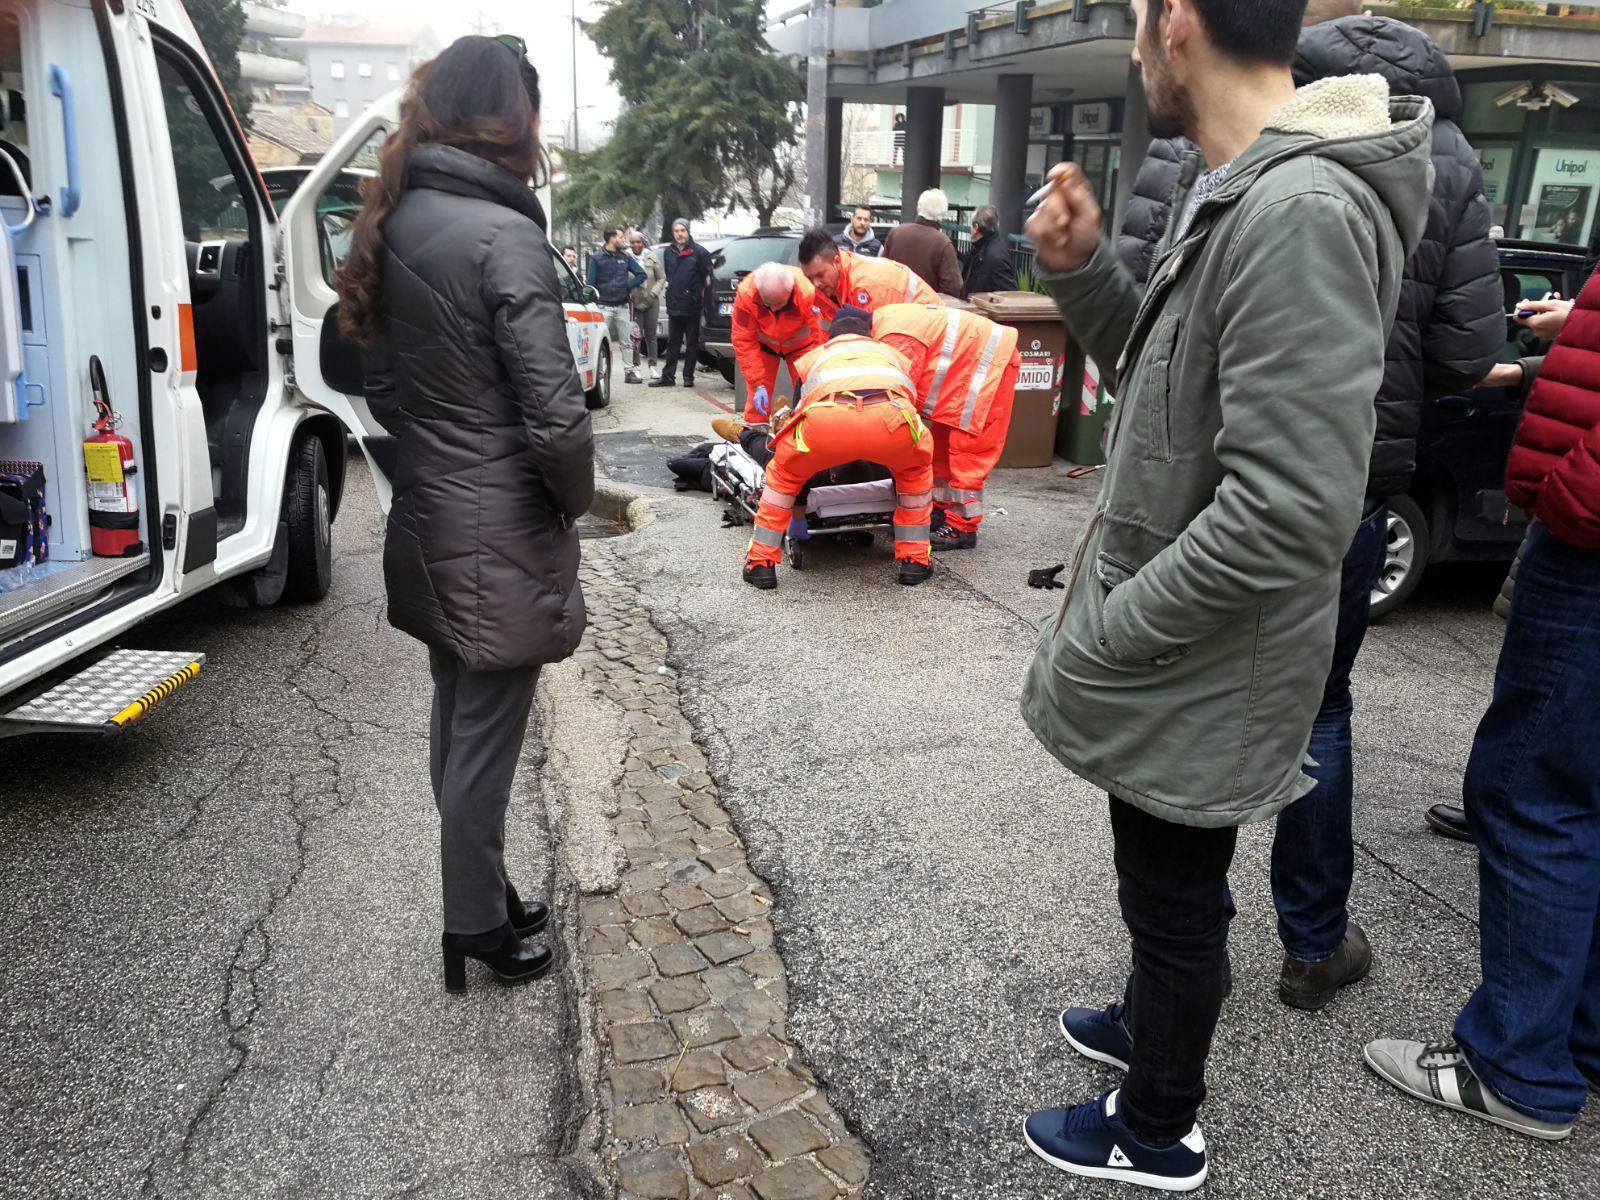 epaselect epa06493400 Paramedics treat an injured person that was shot from a passing vehicle in Macerata, Italy, 03 February 2018. According to the local authorities, the town at the eastern Italian coast near Ancona is under a lockdown due to shots being fired from a car that is driving around in the town for yet unknown reasons.  EPA/GUIDO PICCHIO epaselect ITALY CRIME MACERATA SHOOTING